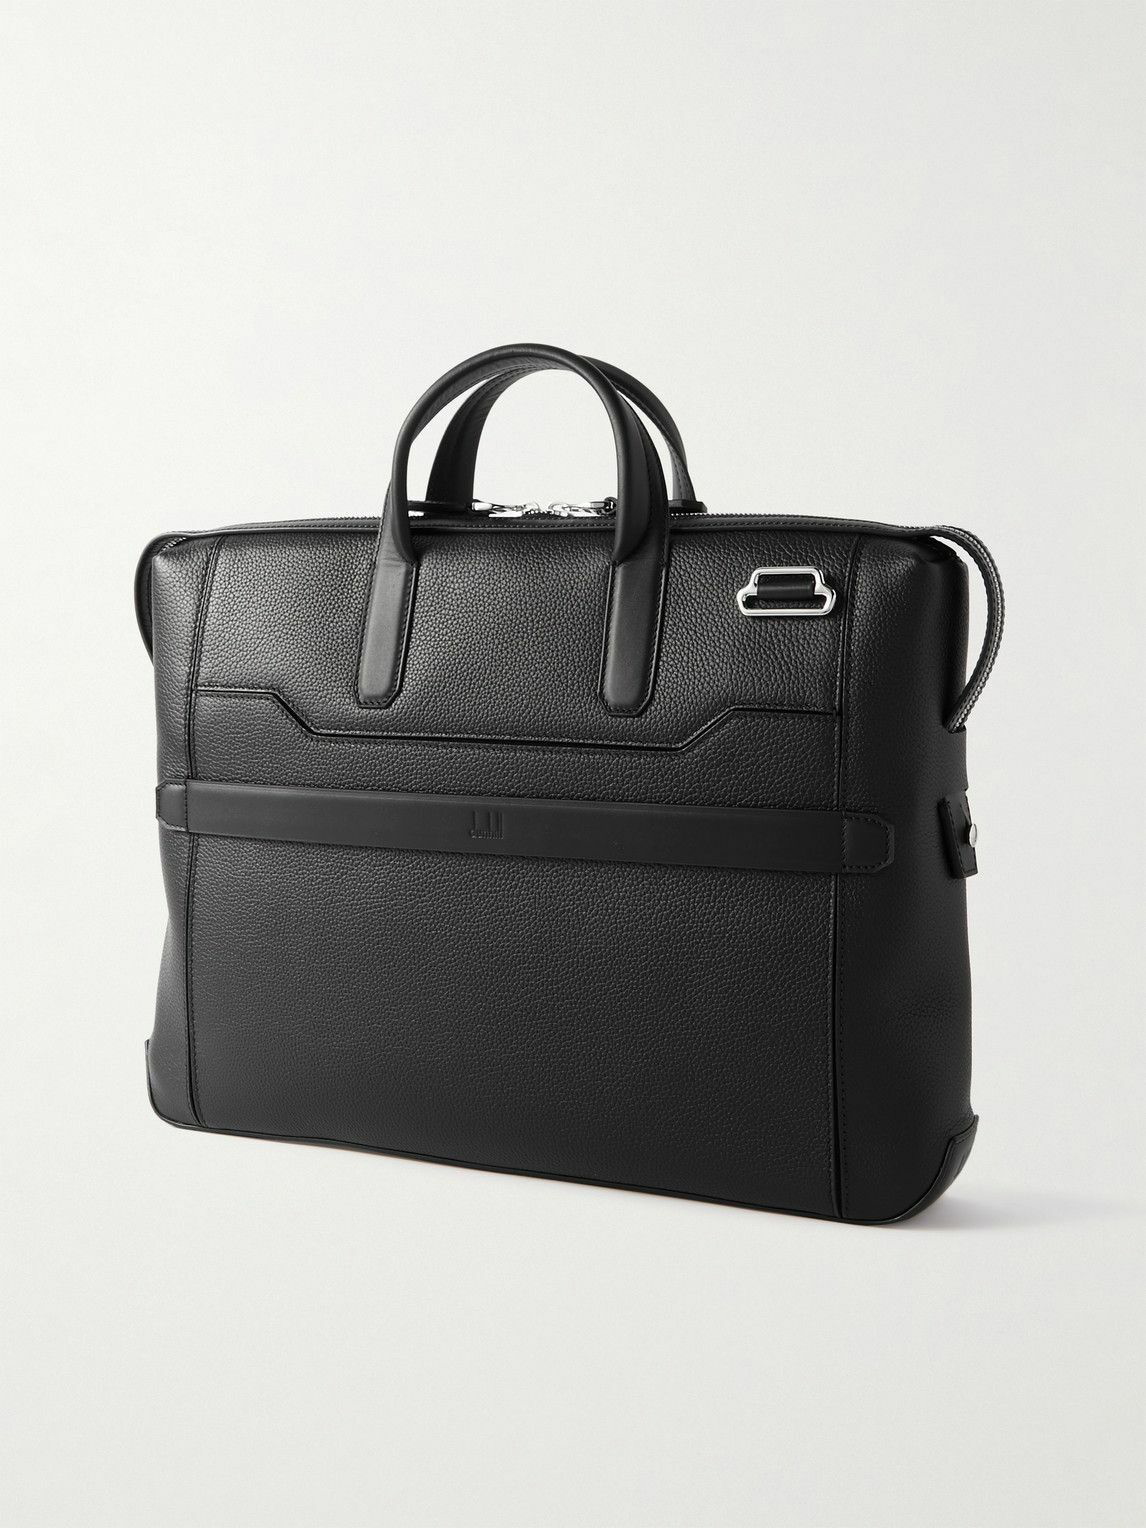 Dunhill - 1893 Harness Full-Grain Leather Briefcase Dunhill